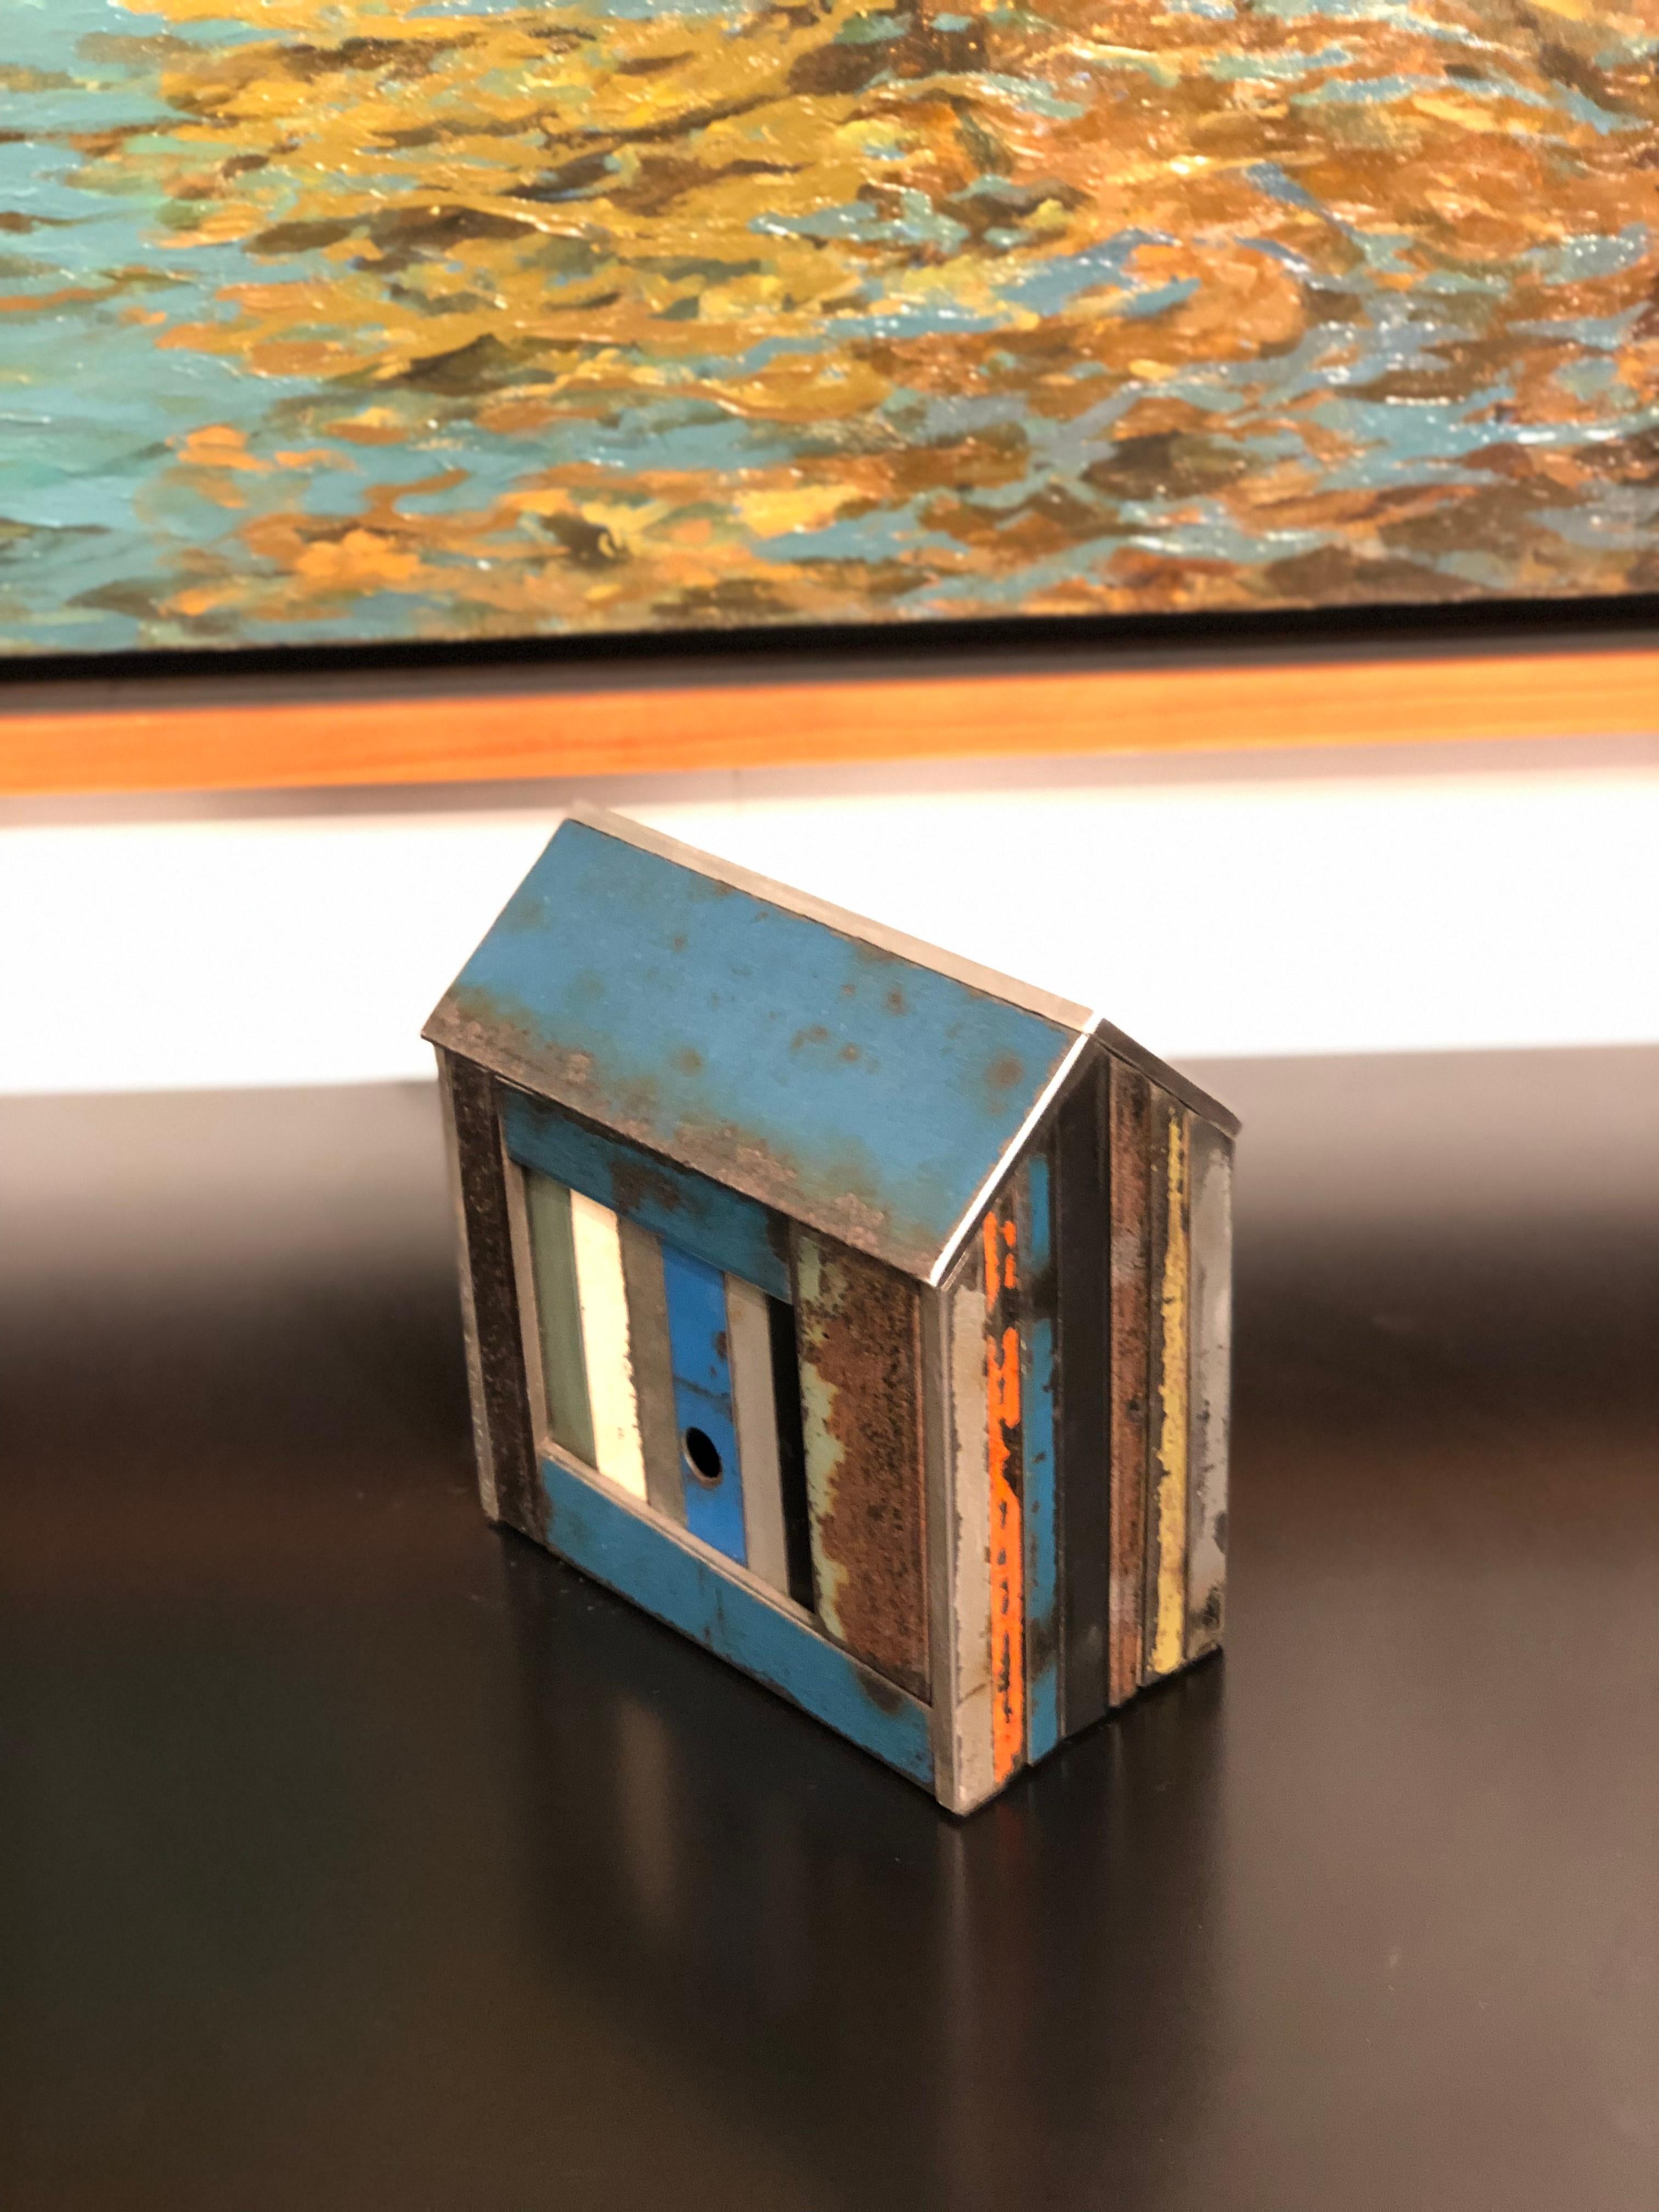 This is a welded steel sculpture made by furniture creator Jim Rose. It is created from salvaged steel panels left over from his larger projects. These sculptures reference traditional American Folk Art barn house models or bird houses. This